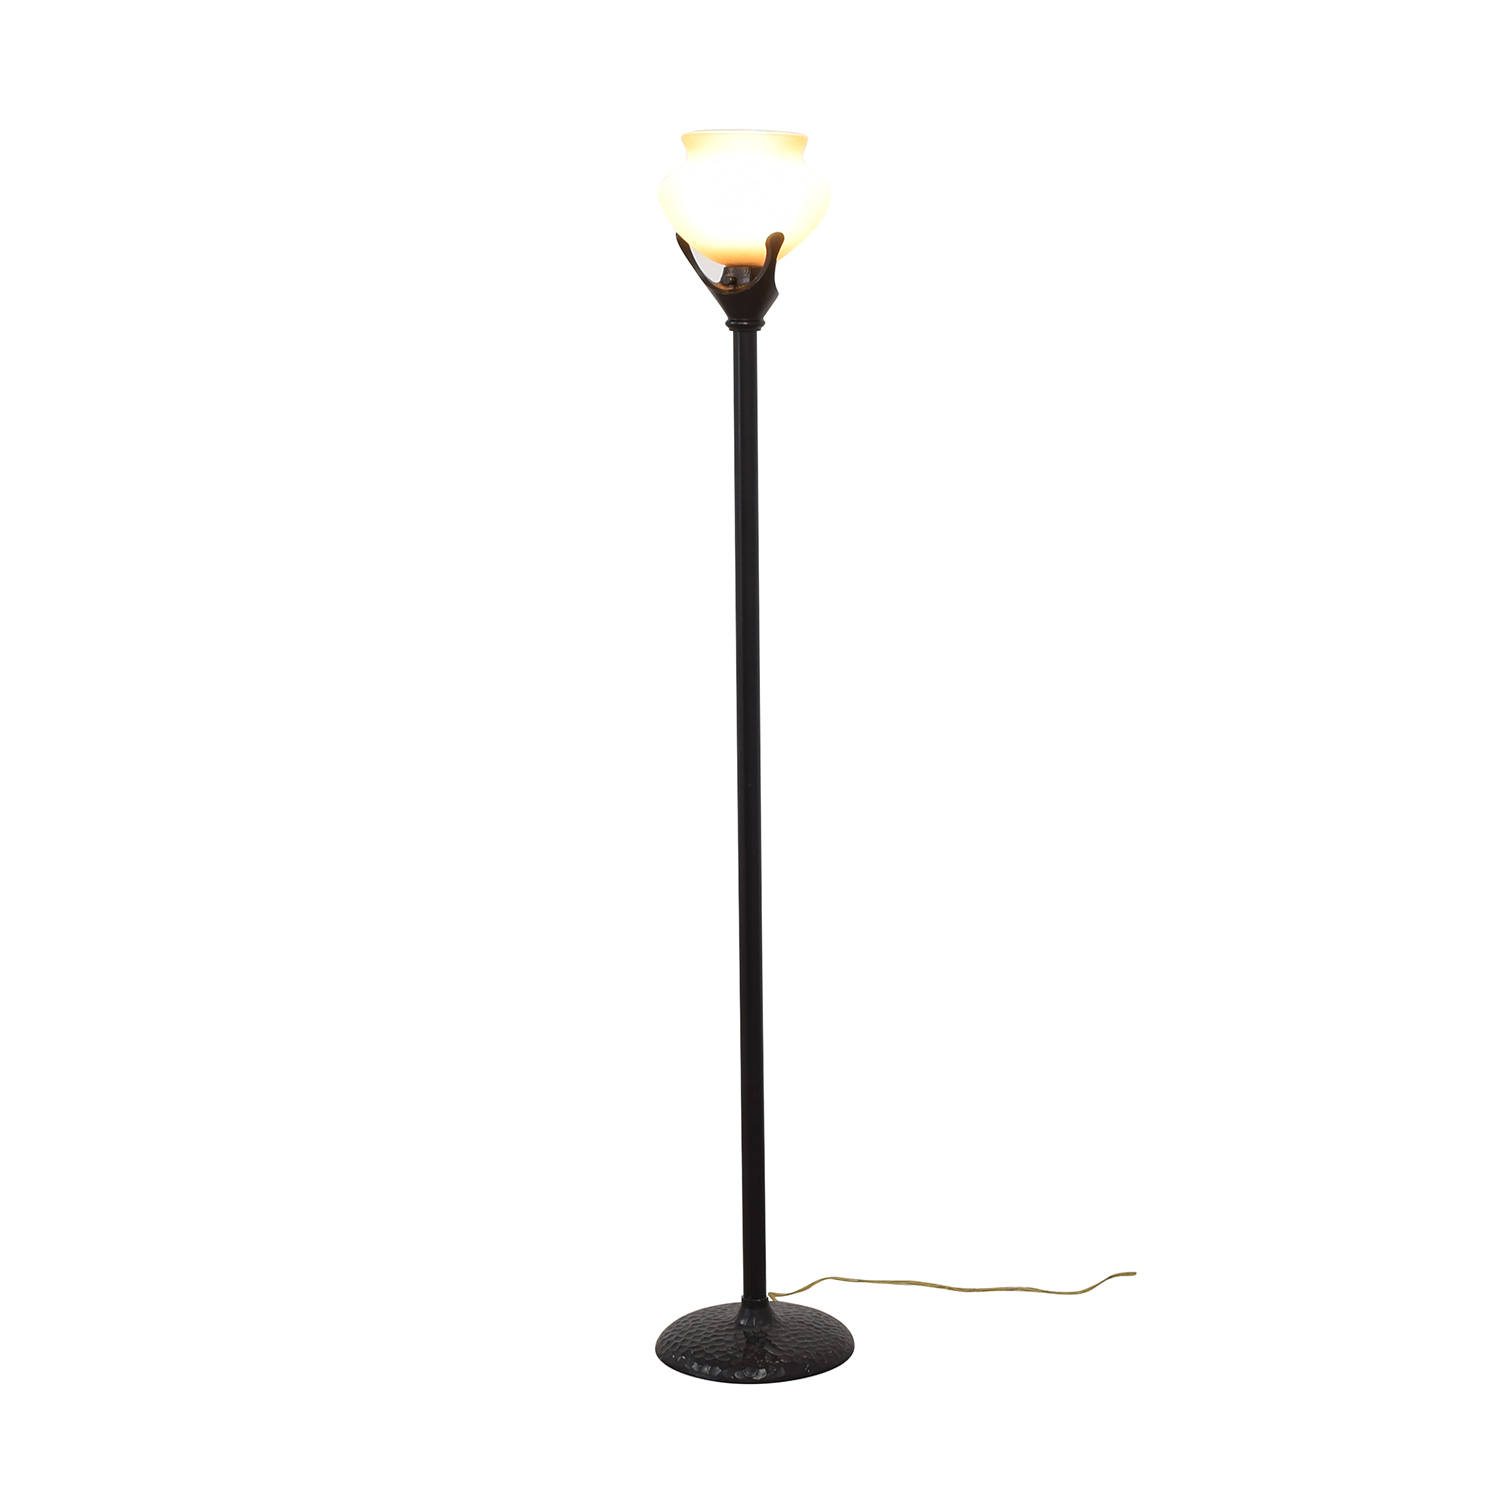 20 Off Torchiere Style Floor Lamp Decor intended for sizing 1500 X 1499